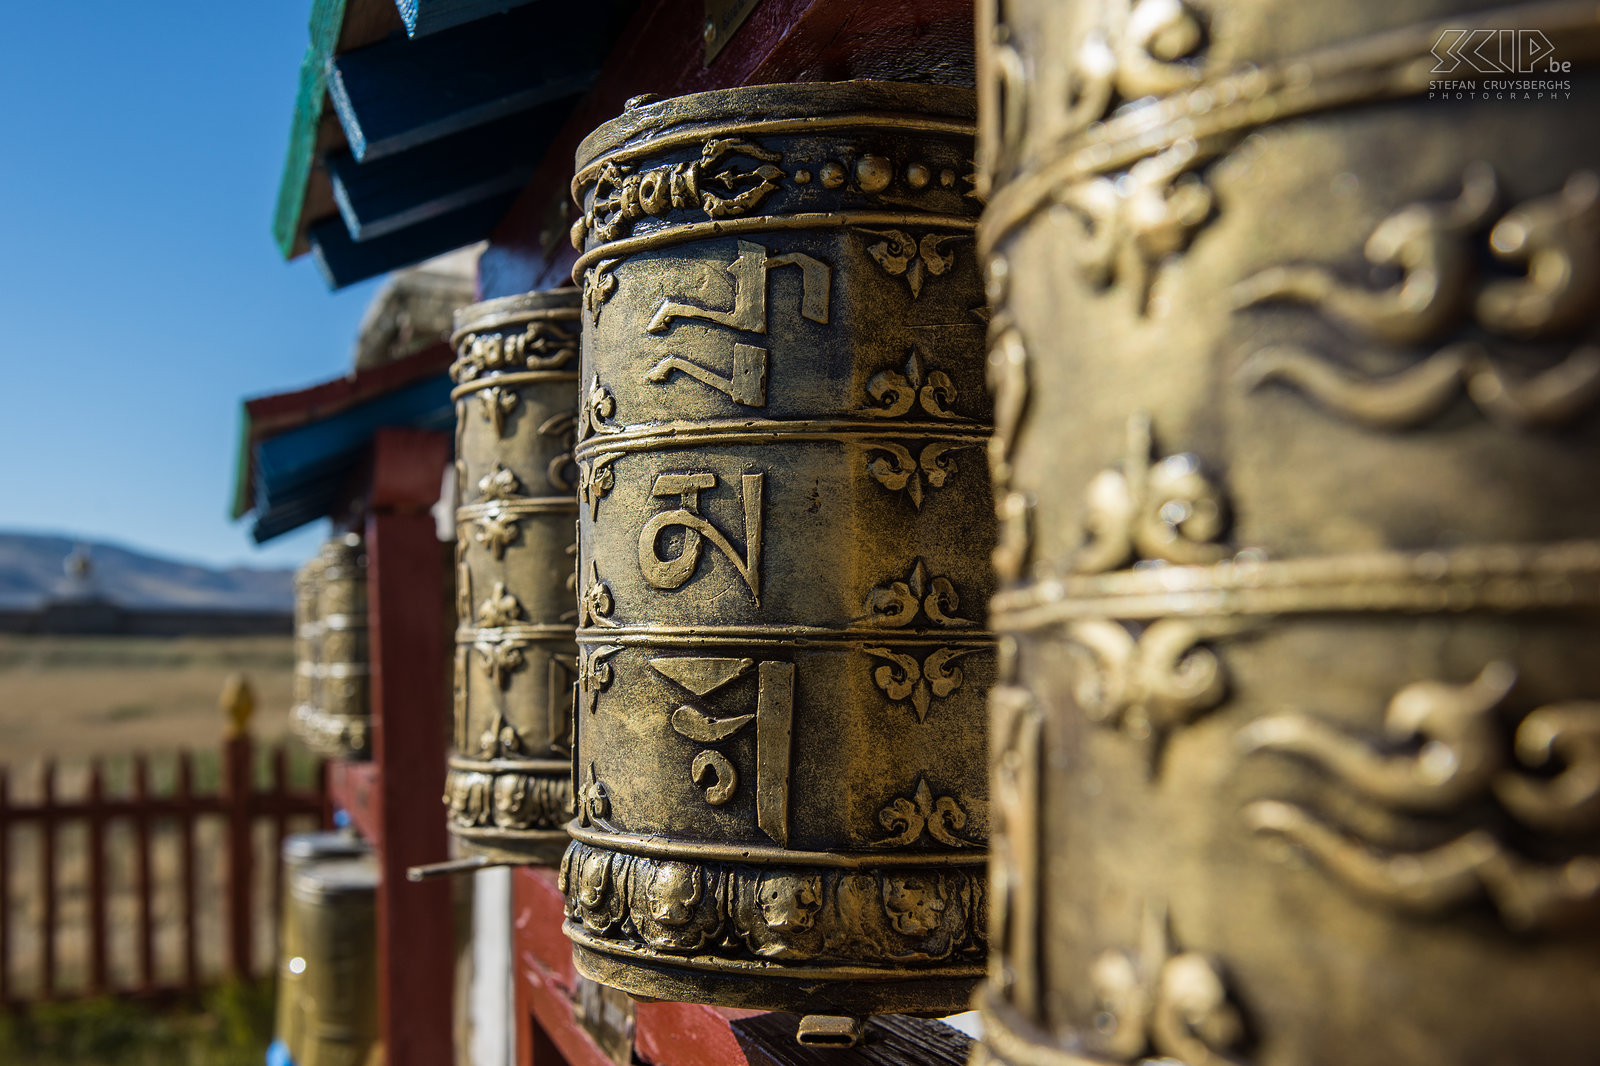 Kharkhorin - Erdene Zuu - Prayer wheels The golden prayer wheels at the Erdene Zuu monastery. At the core of the cylinder certain mantras or prayers are written on or wrapped around it. Turning around a prayer wheel is the same as saying the prayers or the mantras. Stefan Cruysberghs